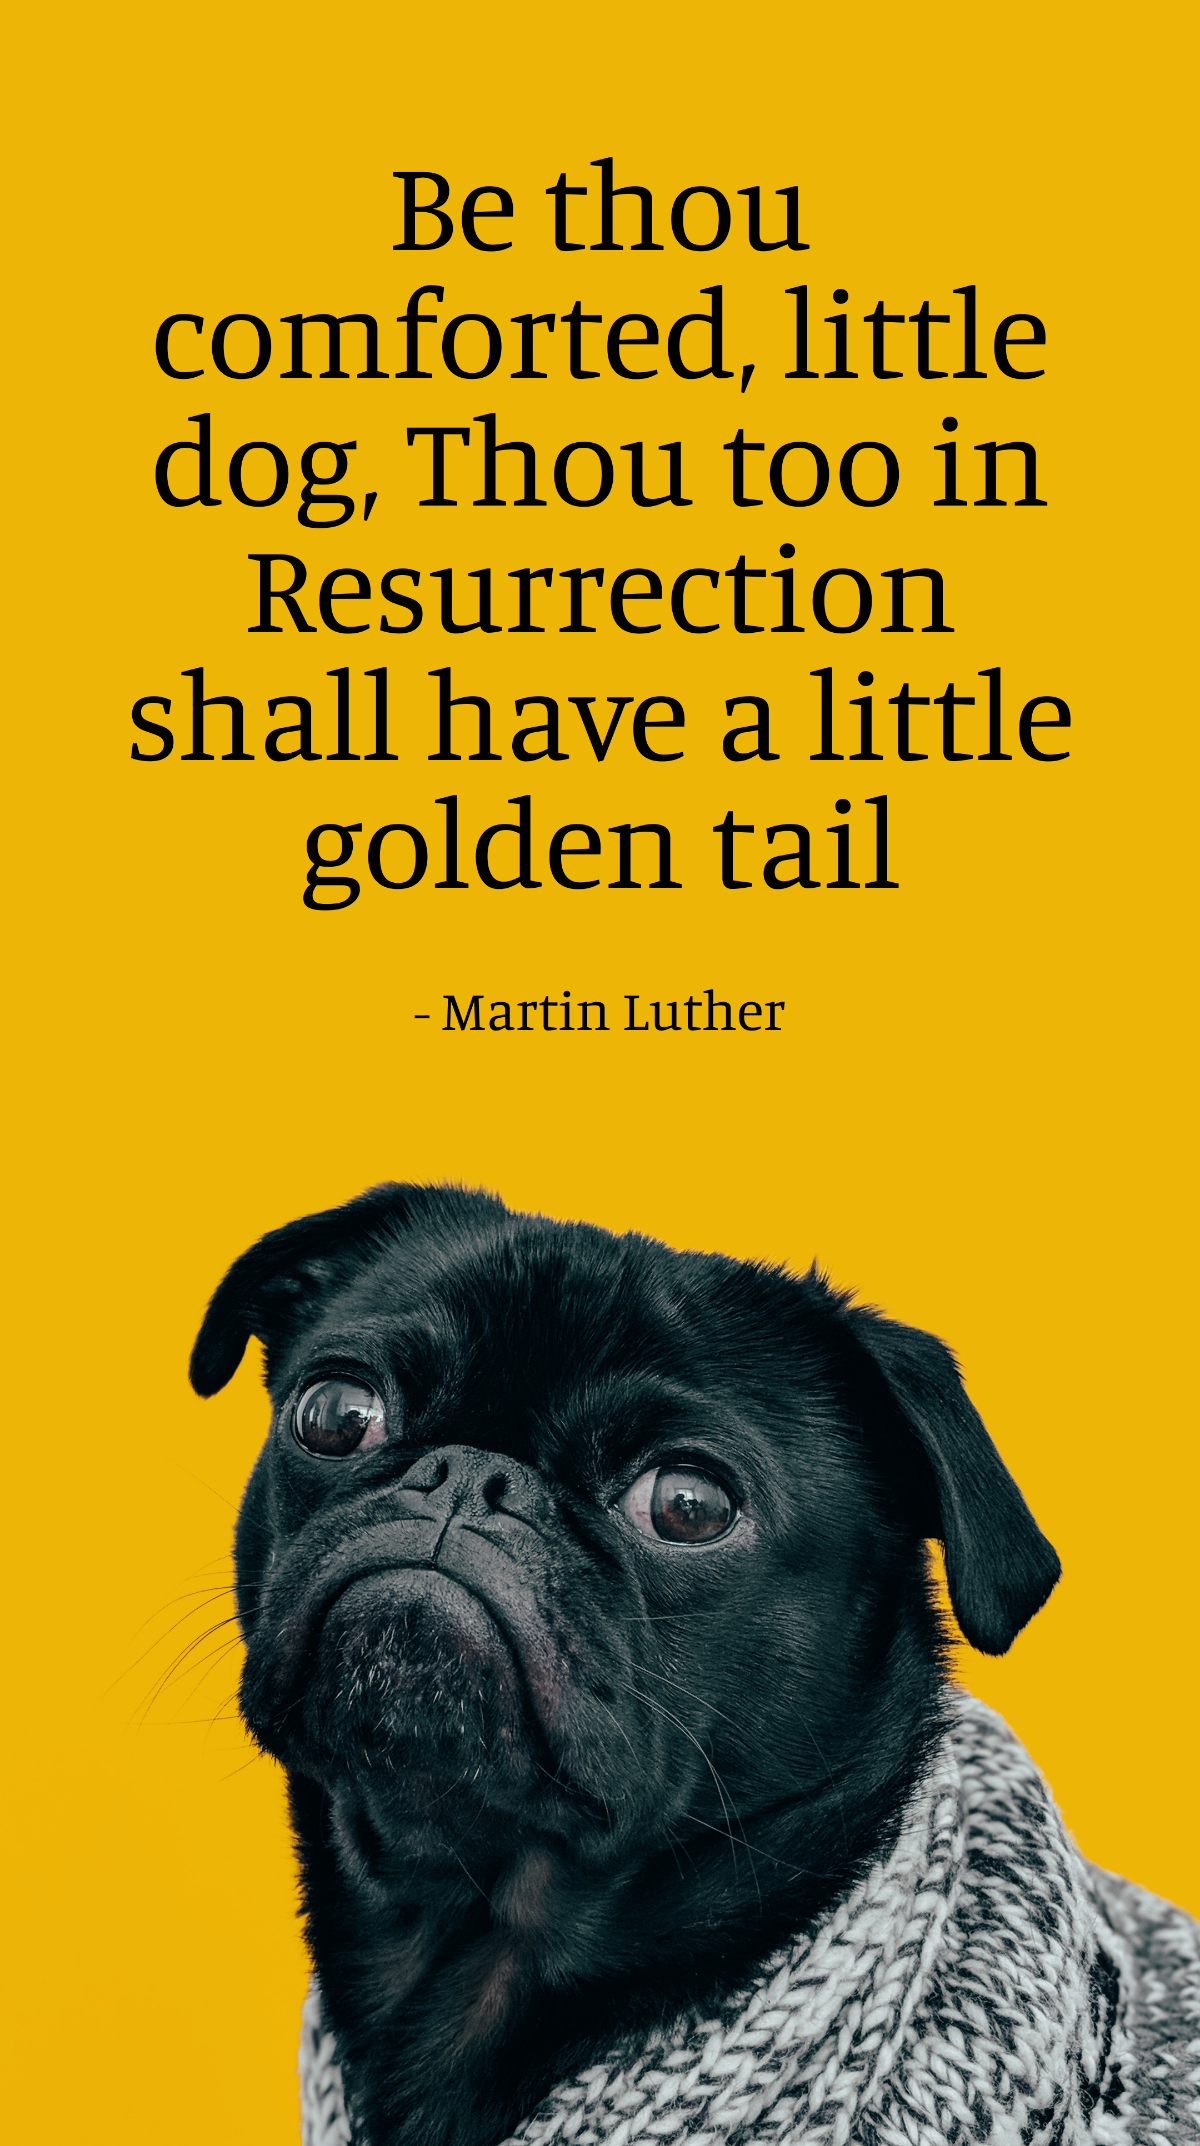 Martin Luther - Be thou comforted, little dog, Thou too in Resurrection shall have a little golden tail Template